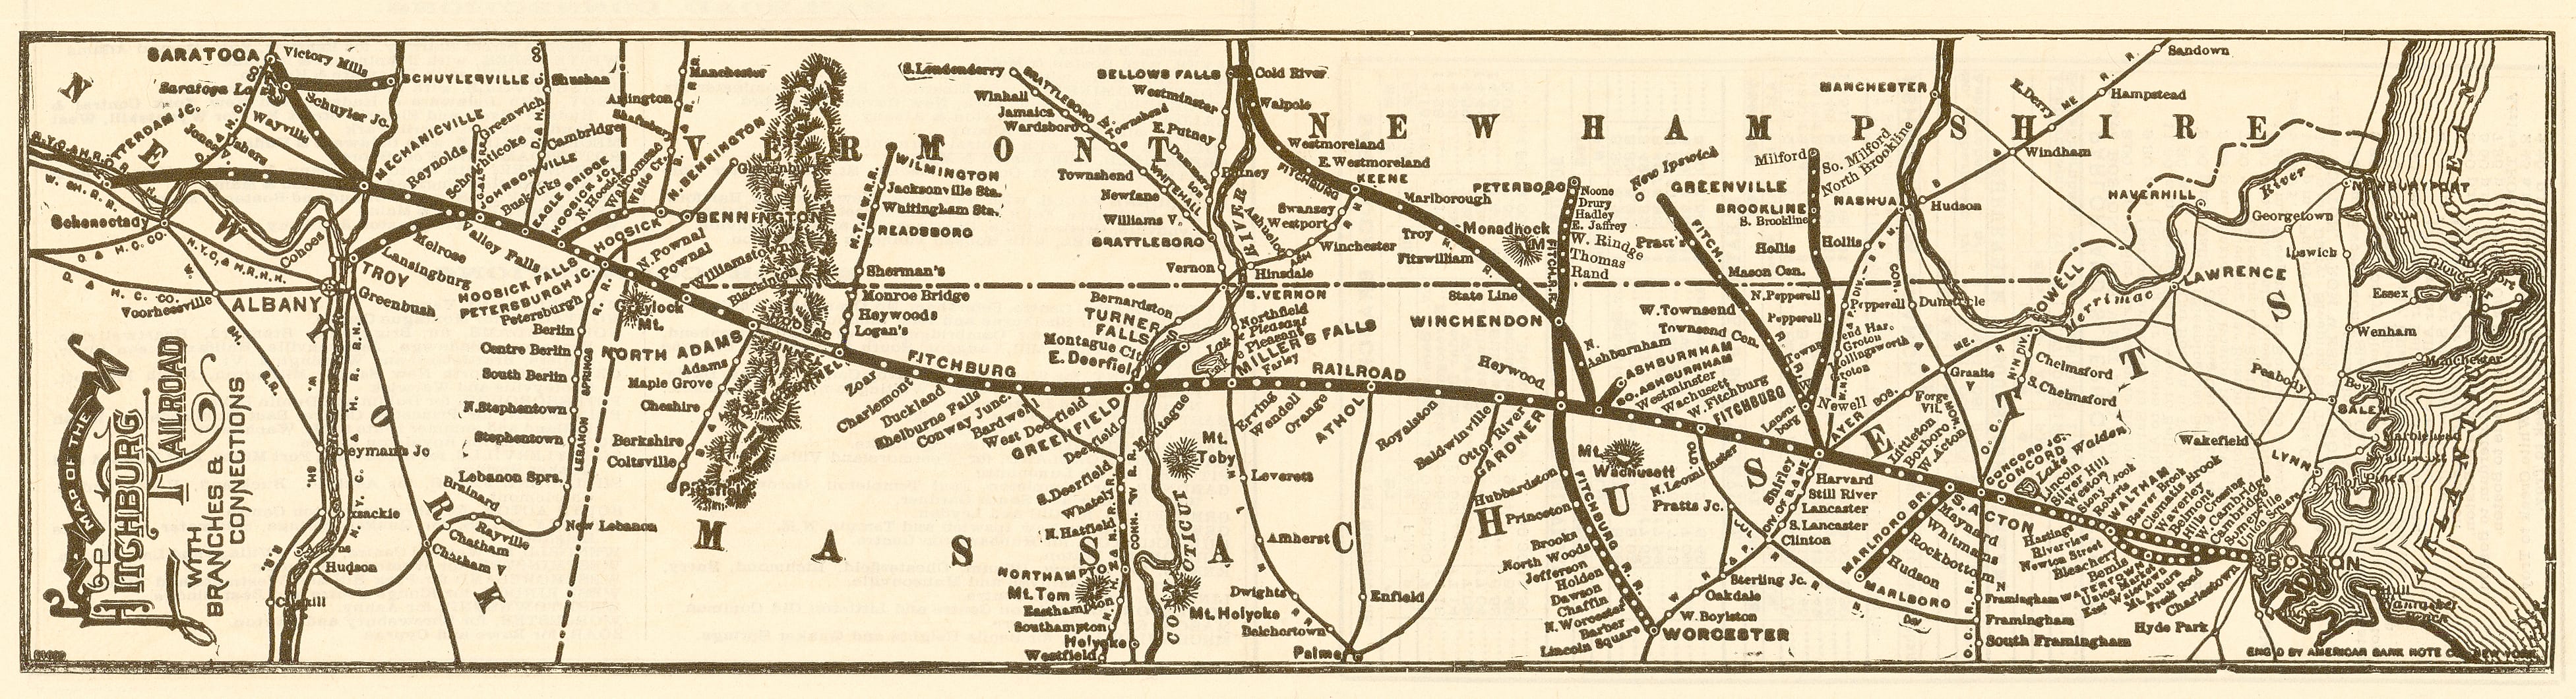 Image of Fitchburg Railroad Timetable Map